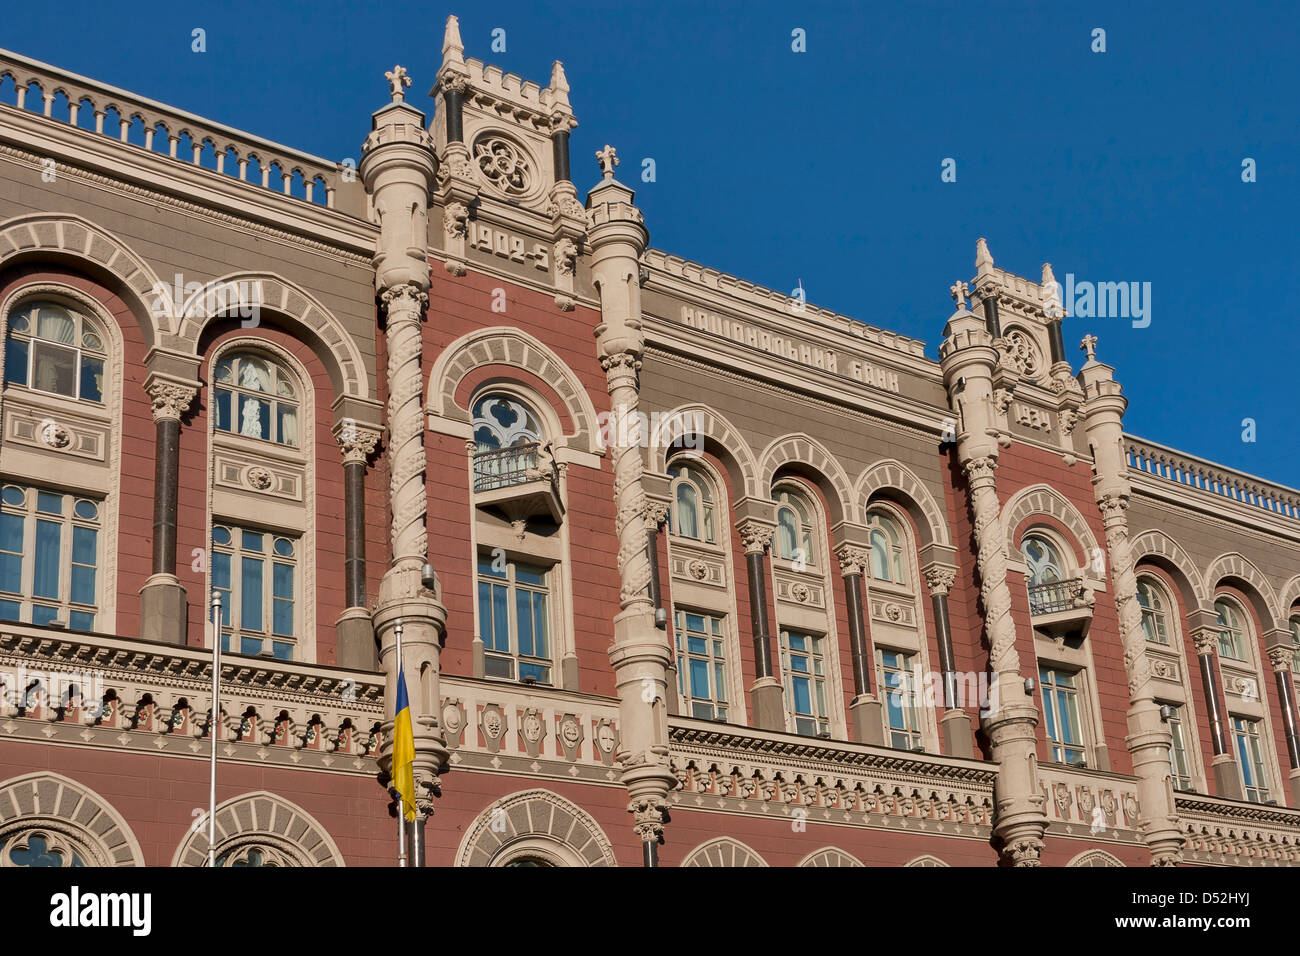 Facade of National Bank of Ukraine building. Built in 1902-1934. Architect O. Kobolyev, decorated by Italian sculptor E. Sala. Stock Photo